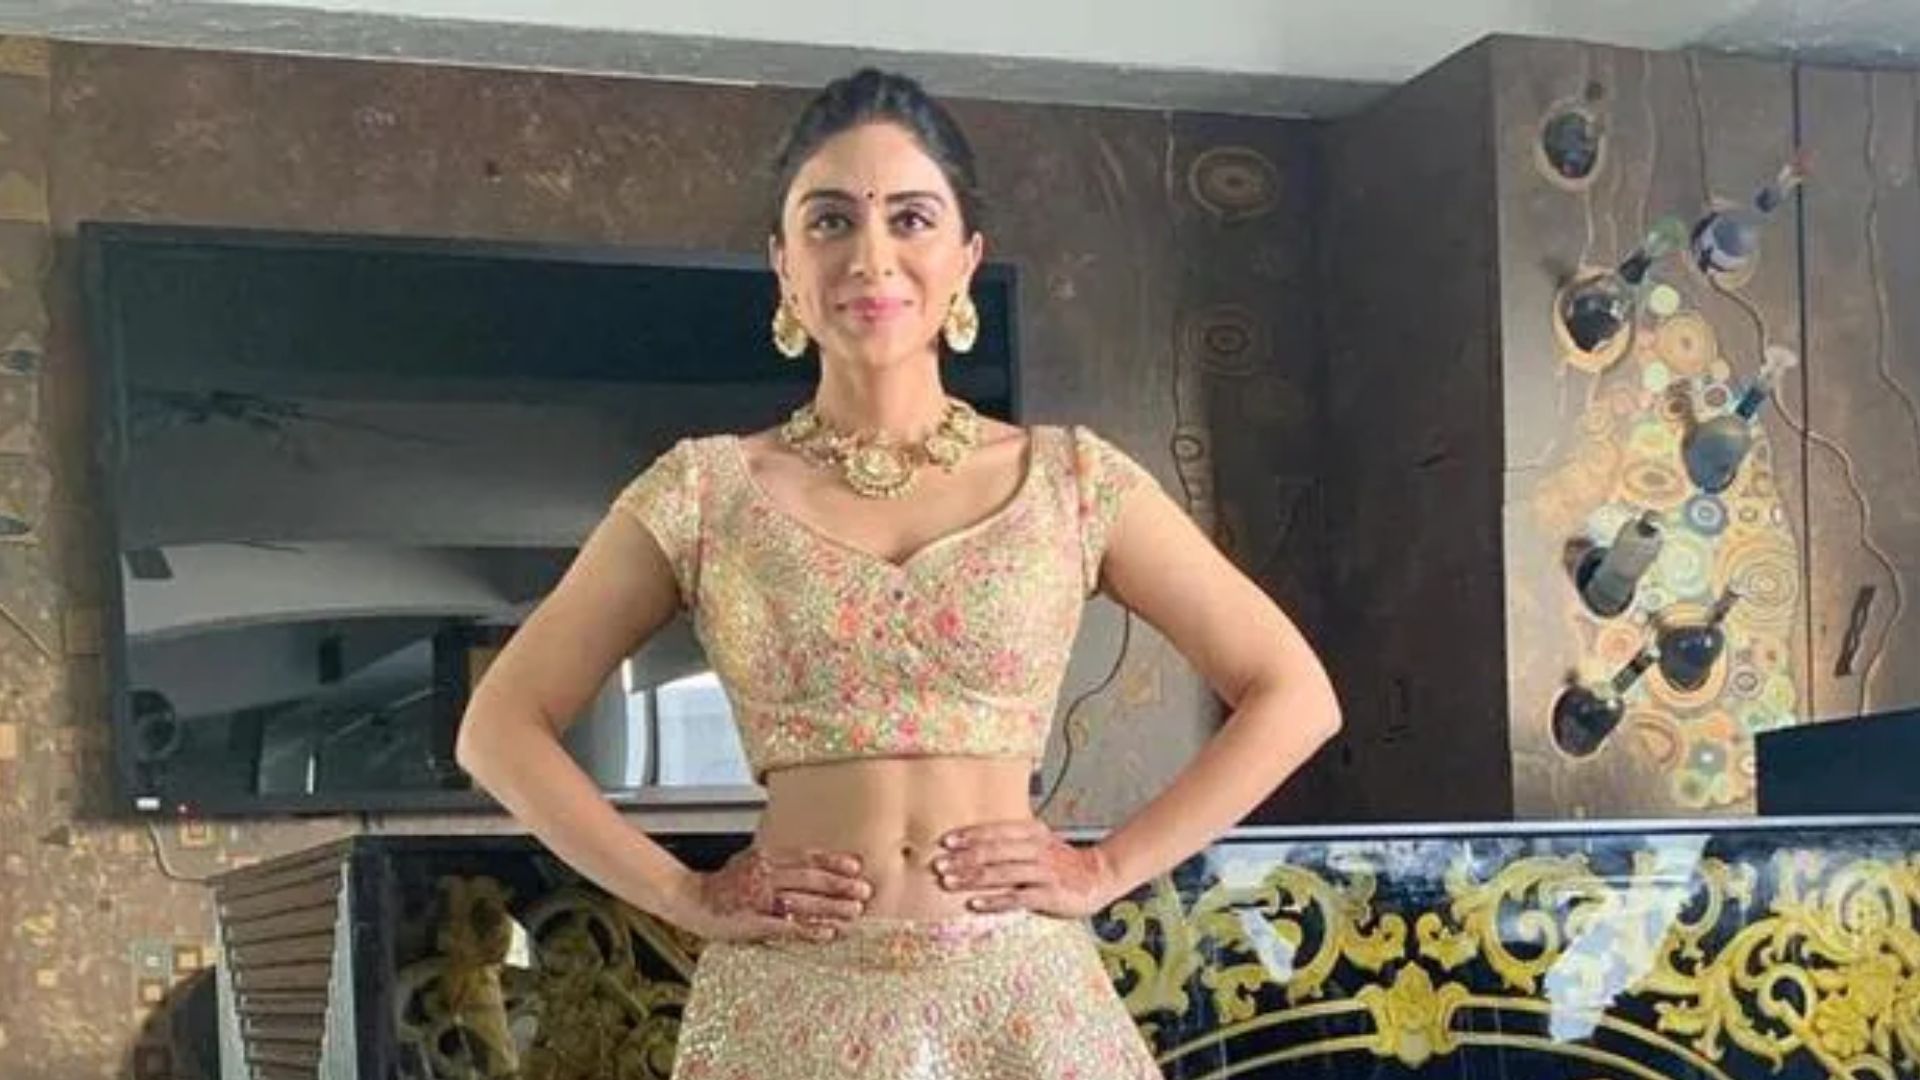  Zoa Morani In Indian Outfit Both Hands On Waist